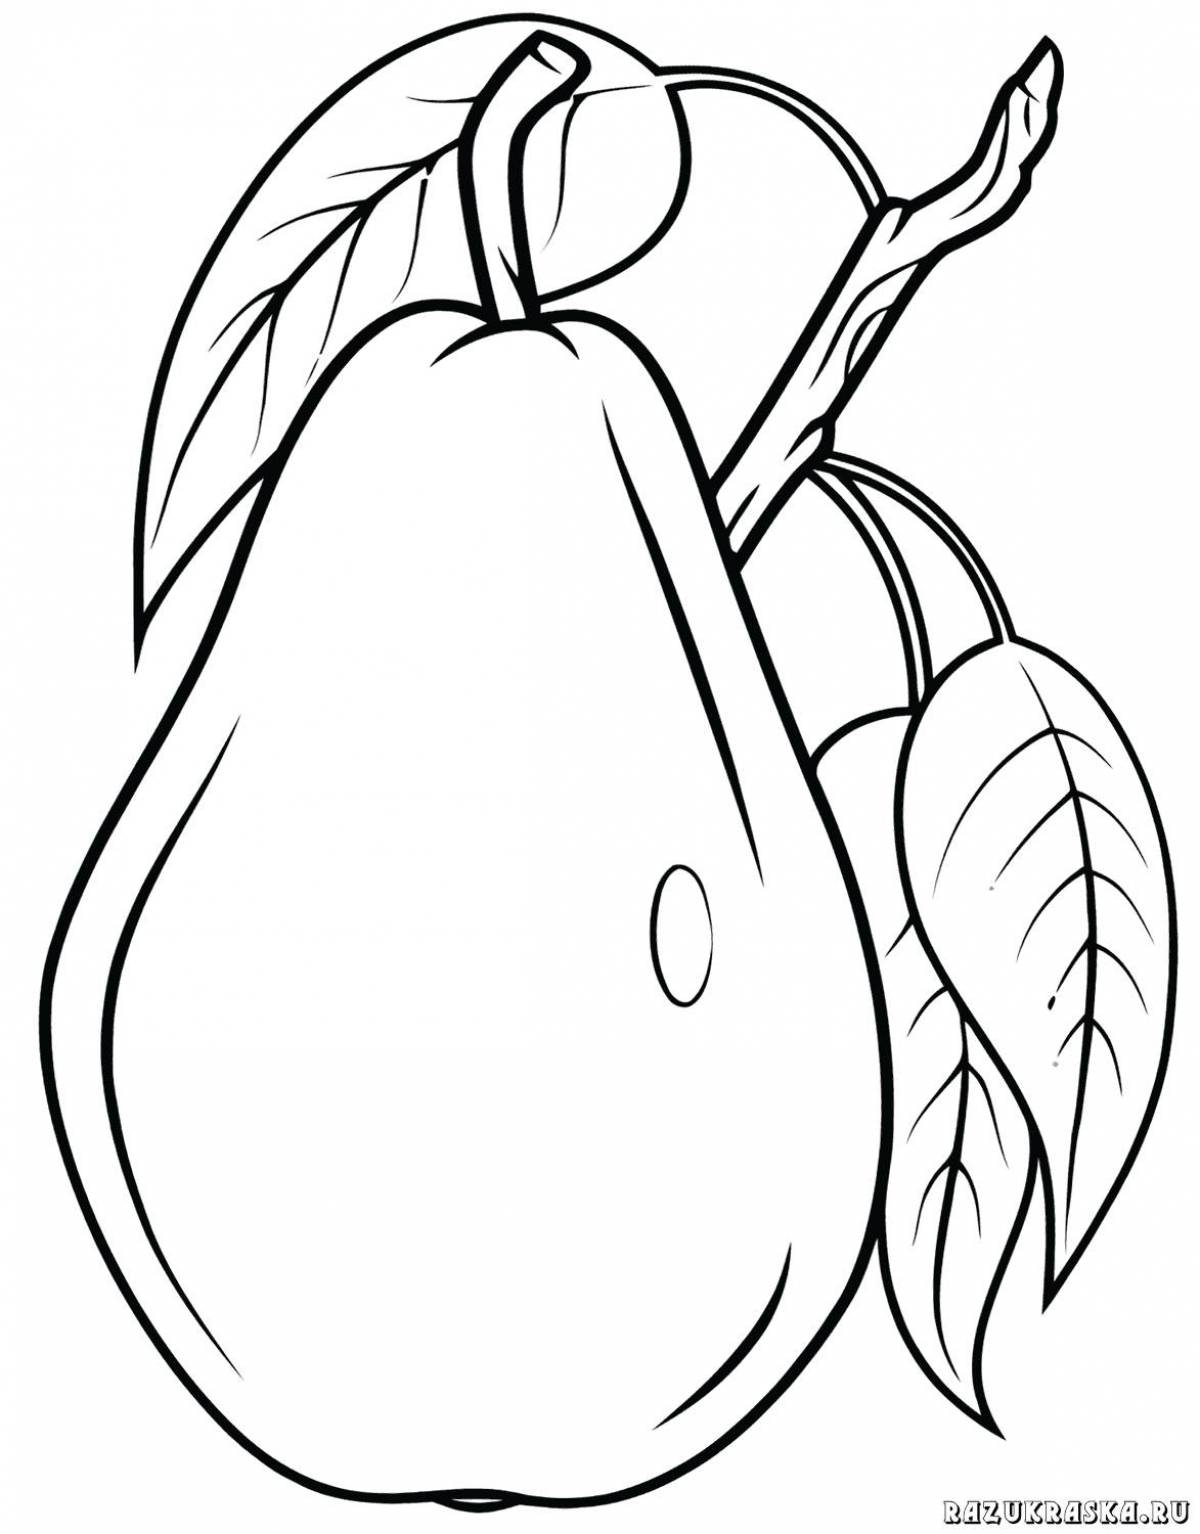 Colorful pear coloring book for kids